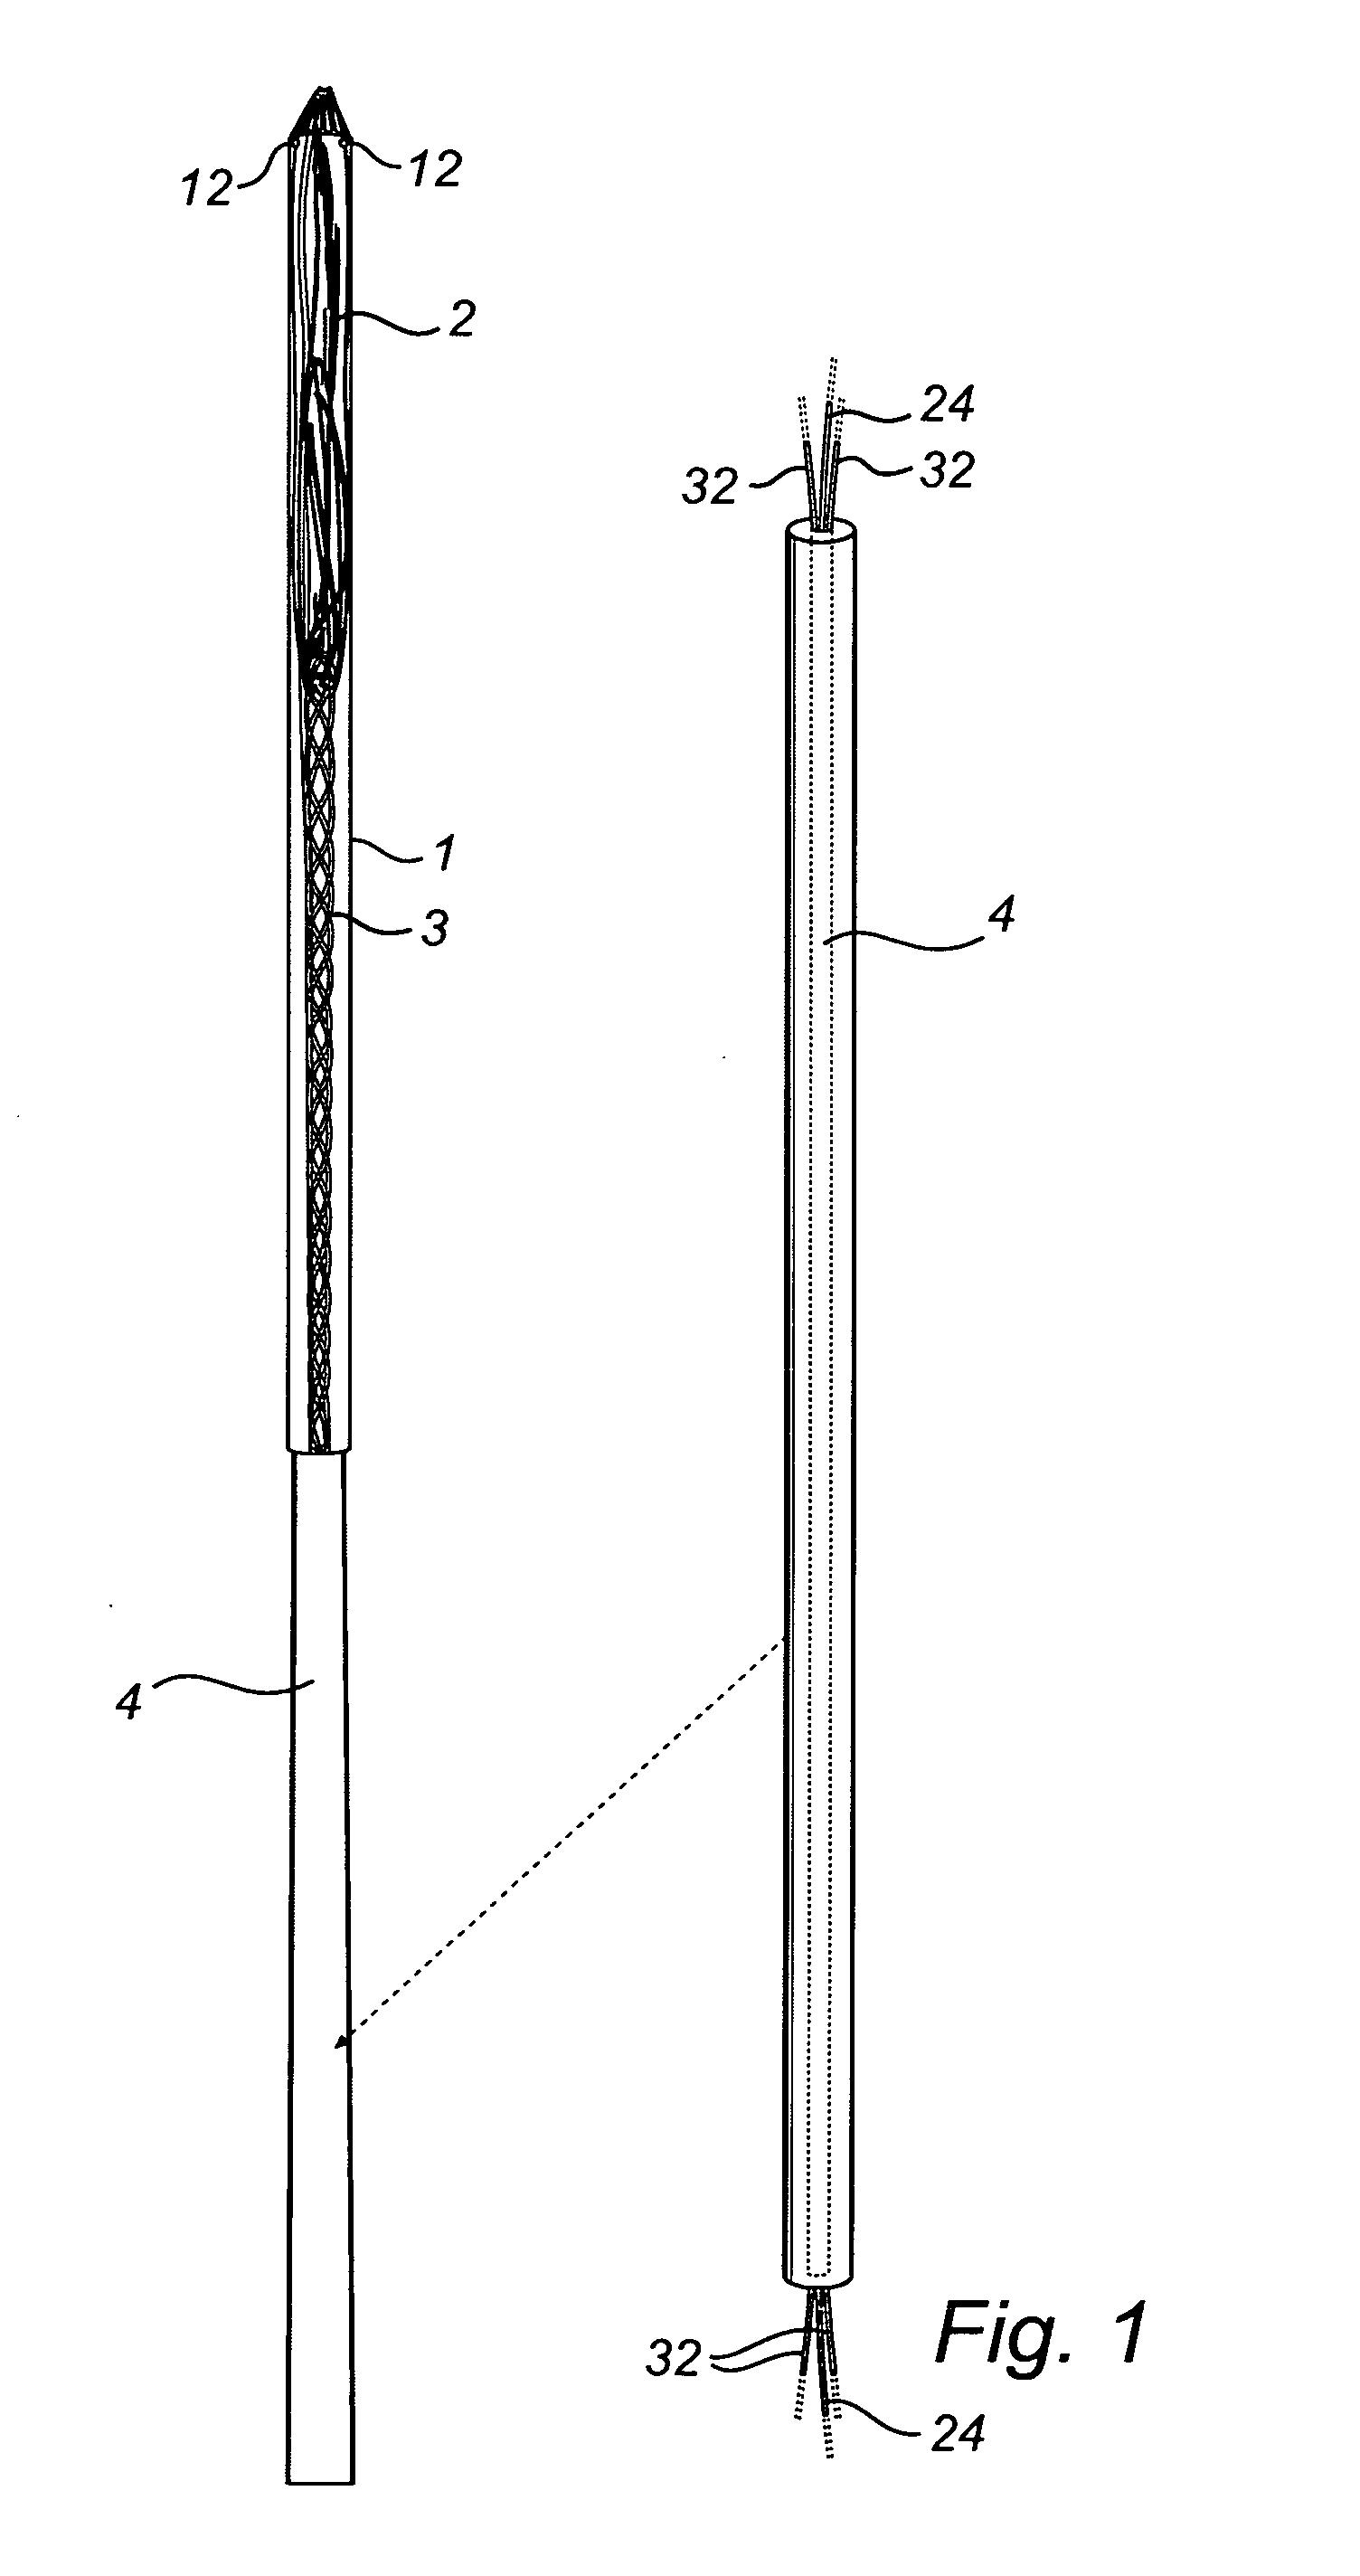 Device and method for treating ruptured aneurysms